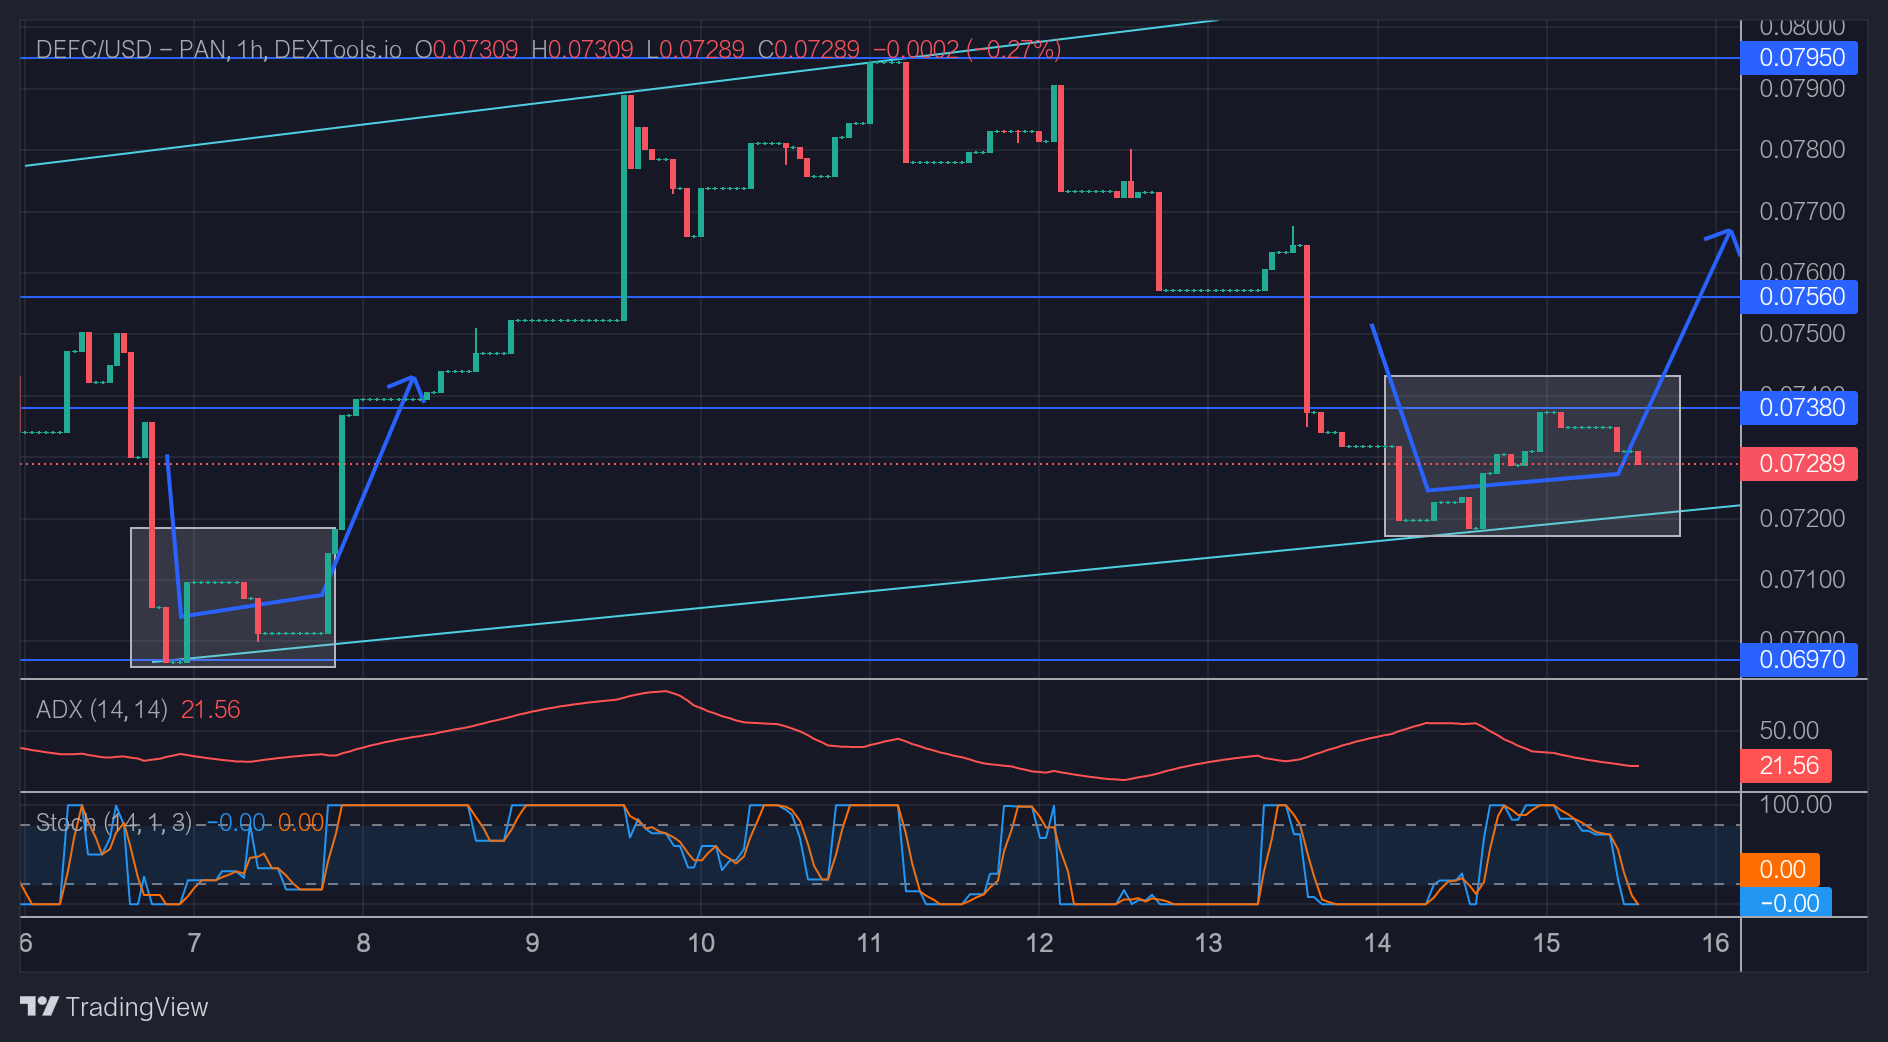 DEFCUSD Price Forecast: DEFCUSD Is Expected to Rise Following This Retest